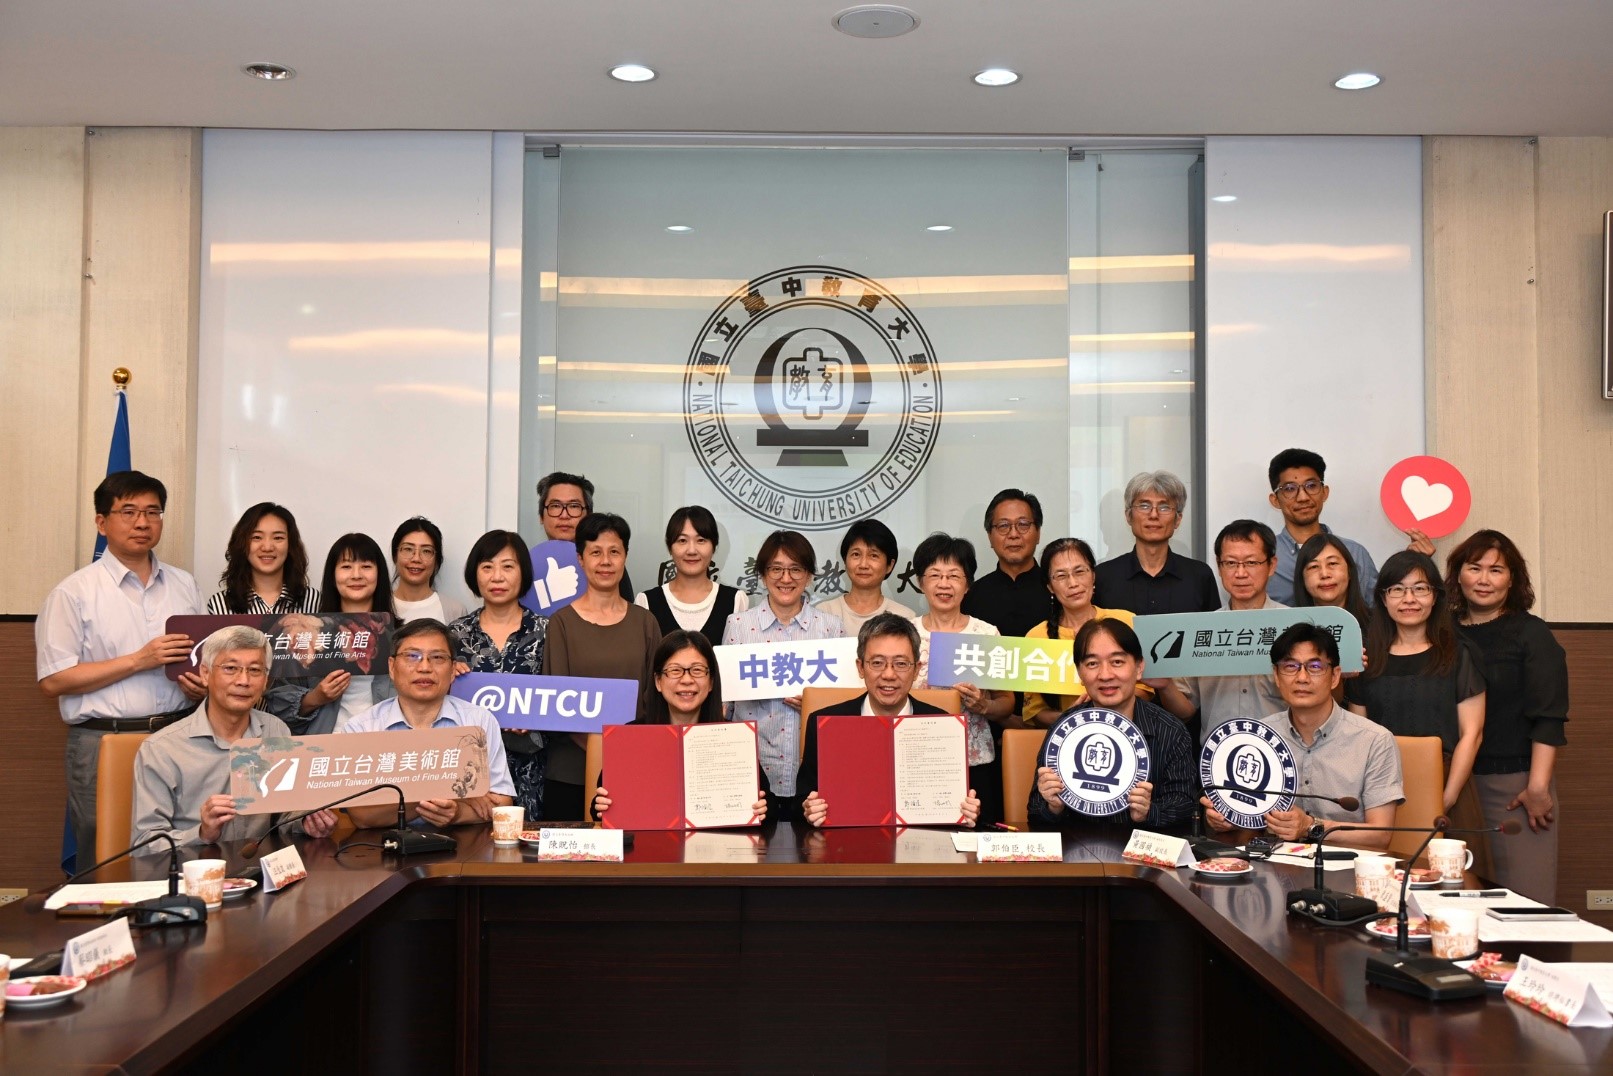 National Taichung University of Education (NTCU) and the National Taiwan Museum of Fine Arts (NTMoFA) have officially signed a cooperation agreement, enabling complementarity between the fields of art and education.